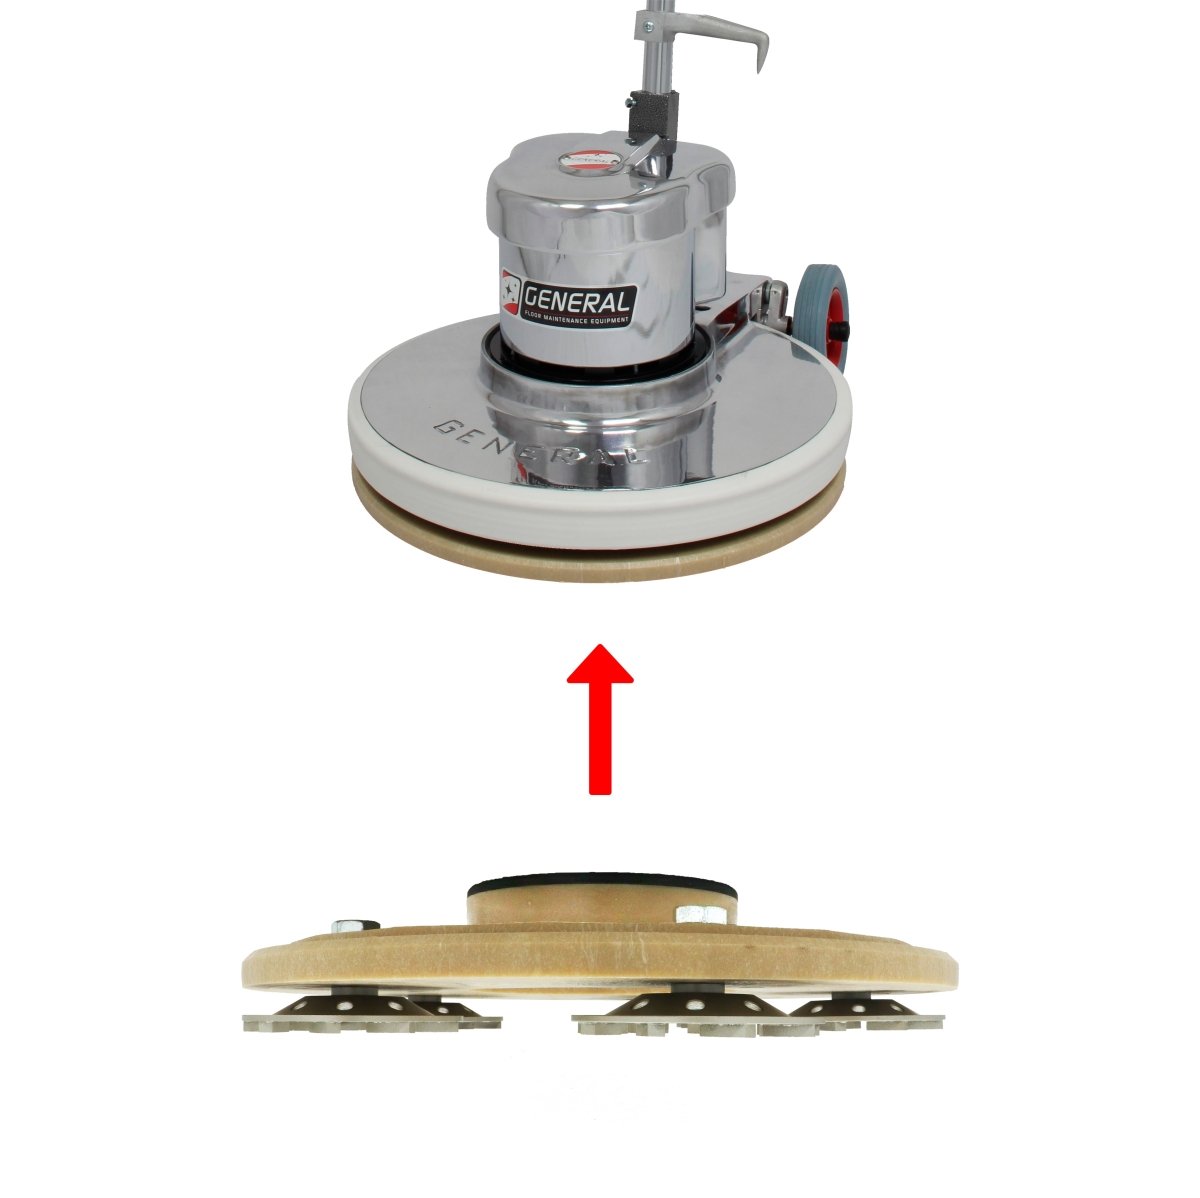 17" Concrete Grinding Plate Example